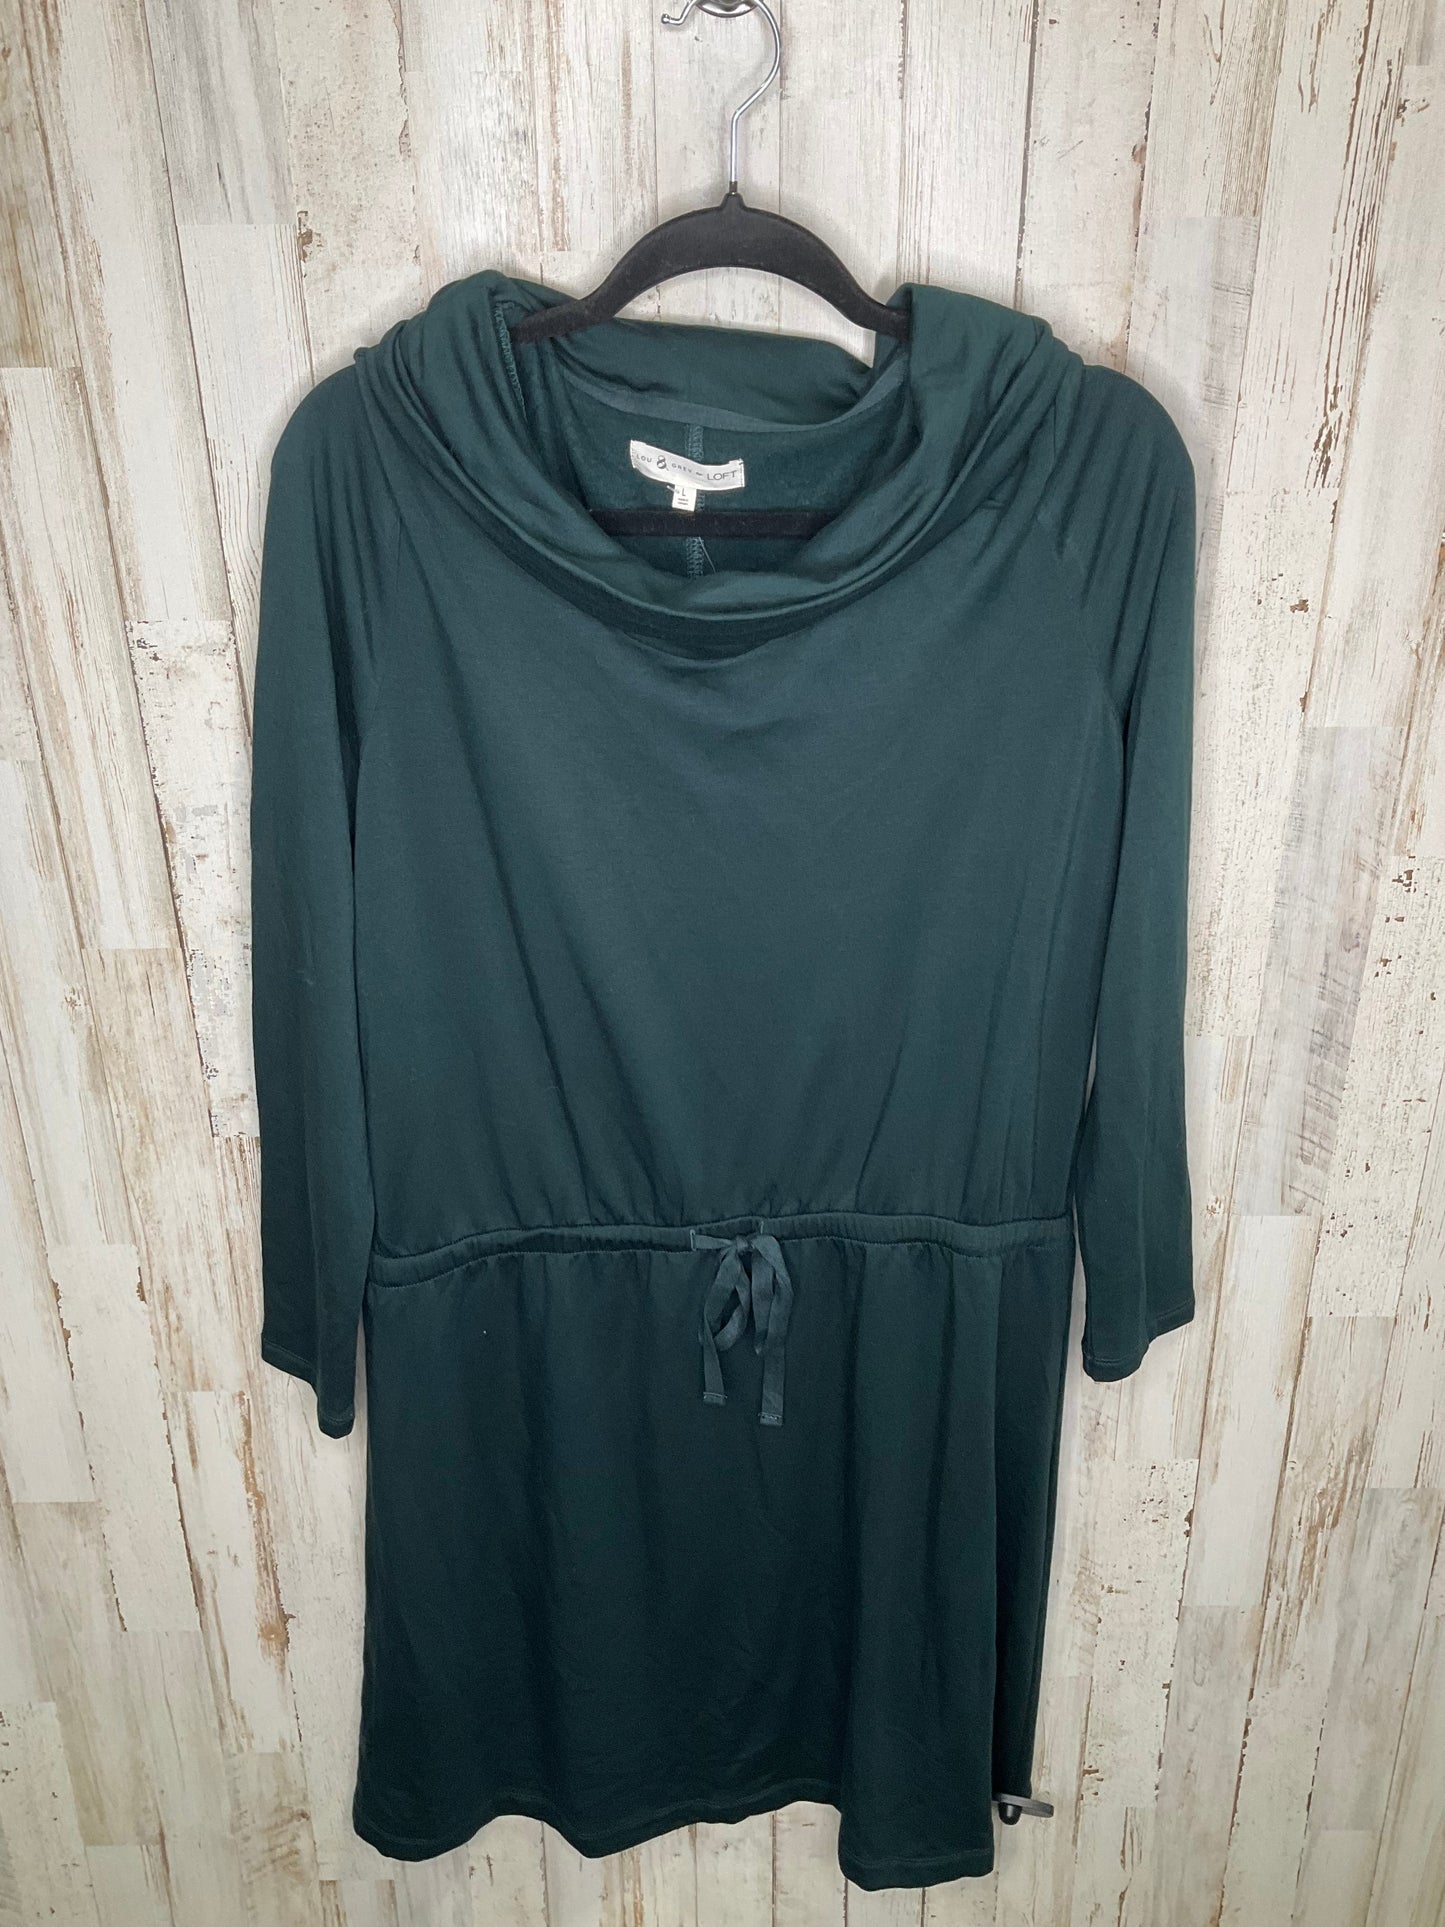 Green Dress Casual Short Lou And Grey, Size L